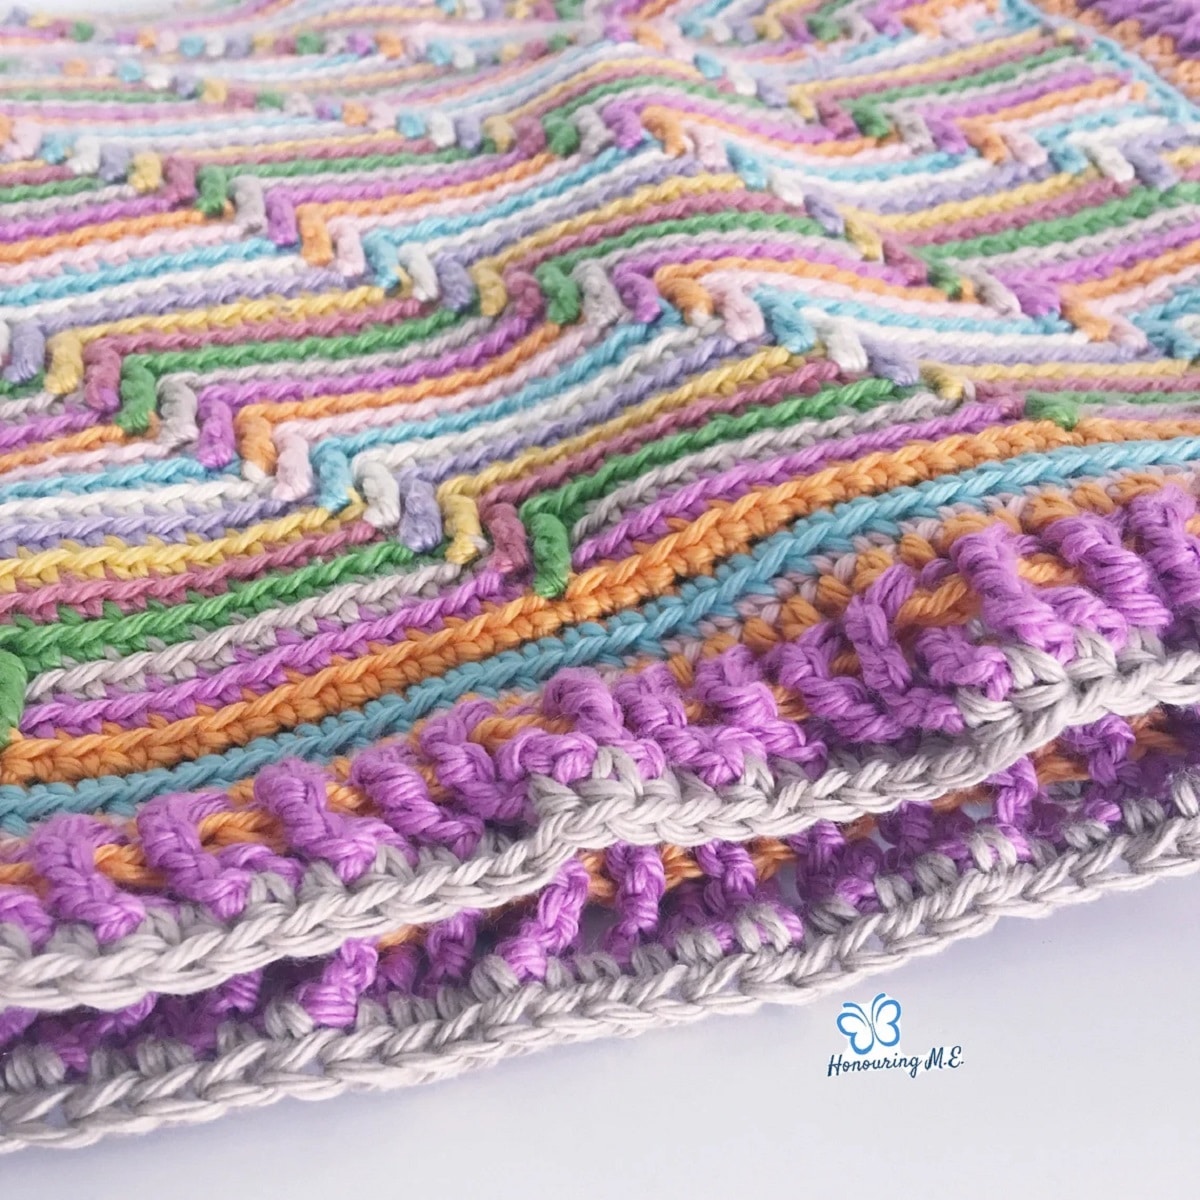  Pink, purple, green, orange, blue, and cream striped crochet blanket with a purple and cream trim on a white background.